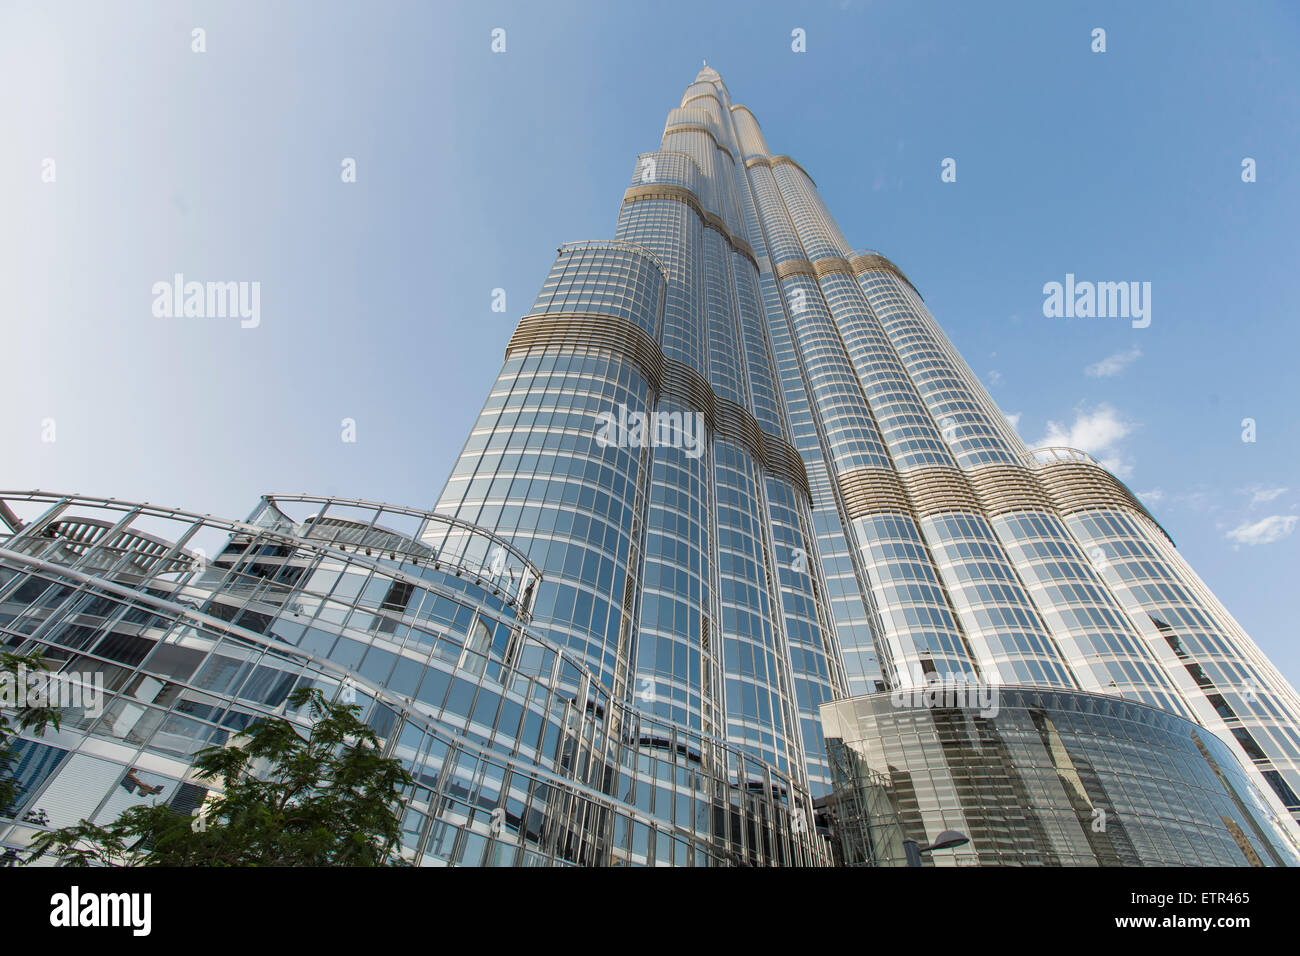 Burj Khalifa in Dubai. This skyscraper is the tallest man-made structure ever built, at 828 m. Stock Photo